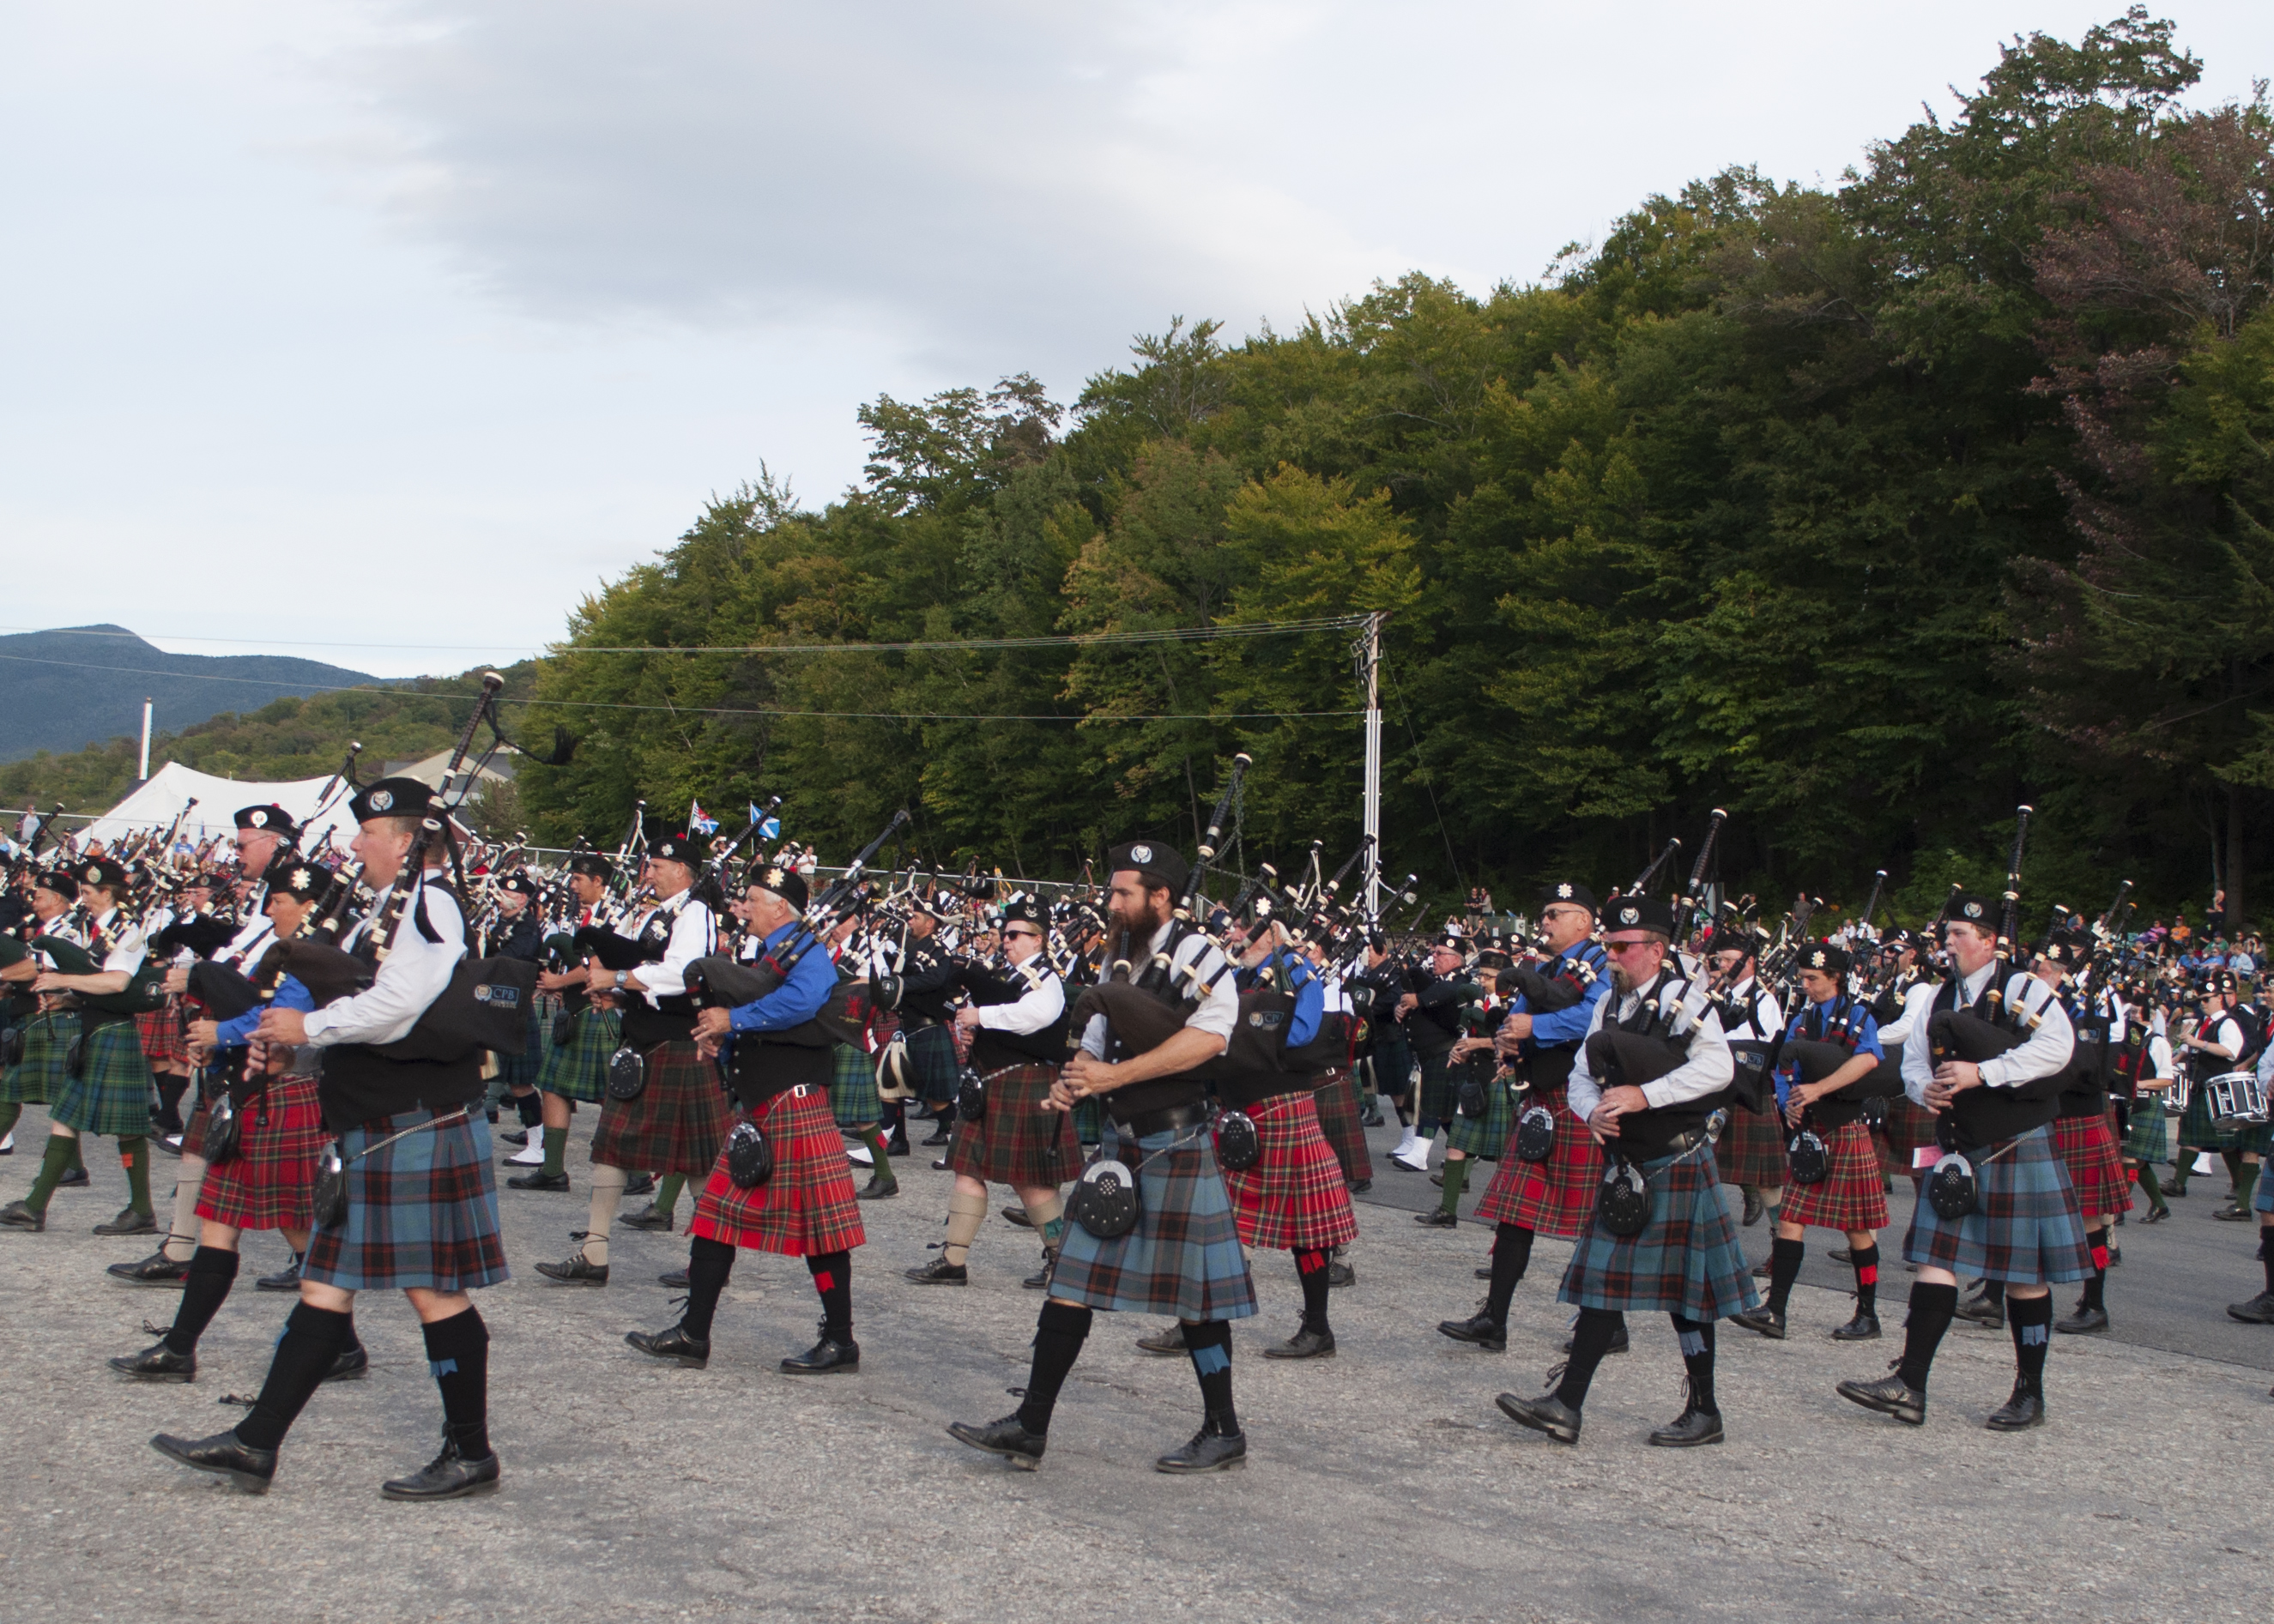 hundreds of scottish bagpipers marching in unison at scottish highland games